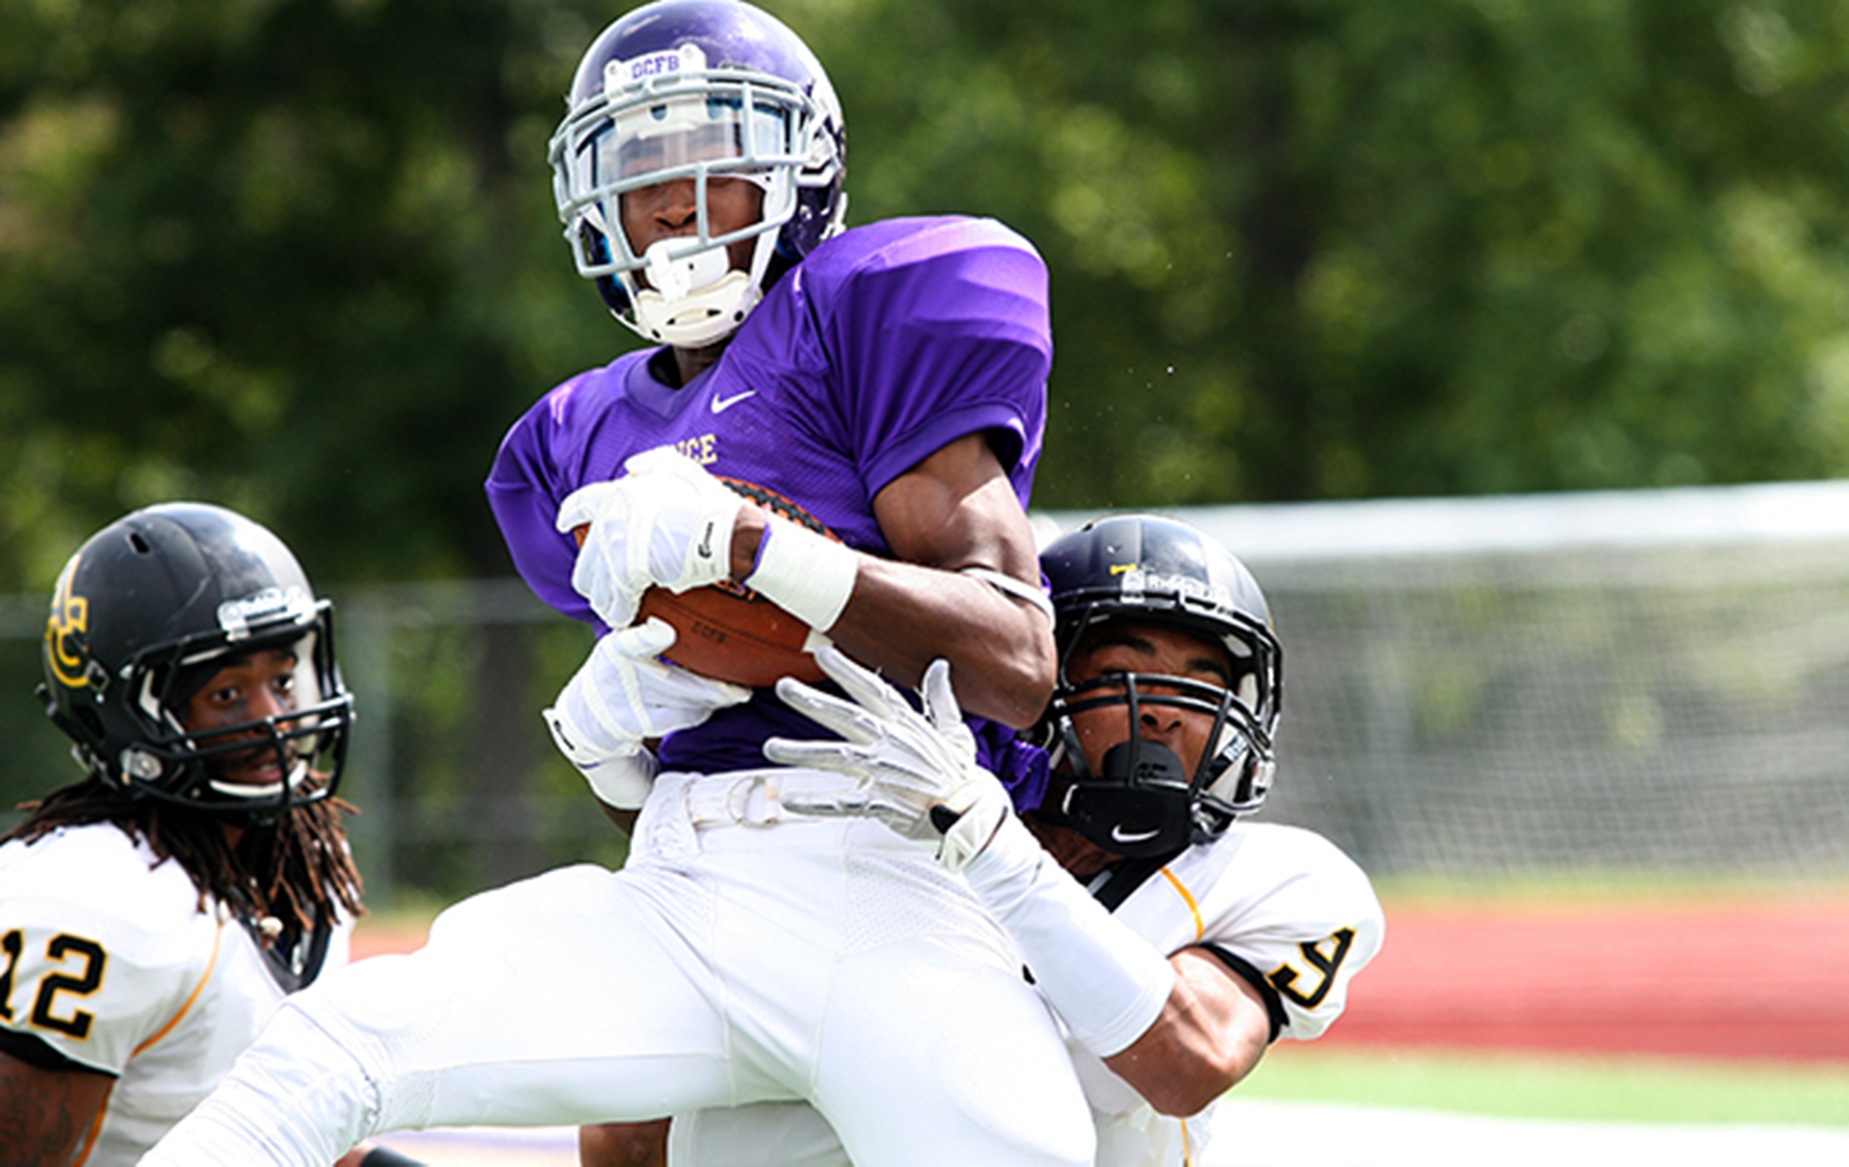 Defiance Football Comes Up Short in Season-Opener Against Adrian (Mich.)